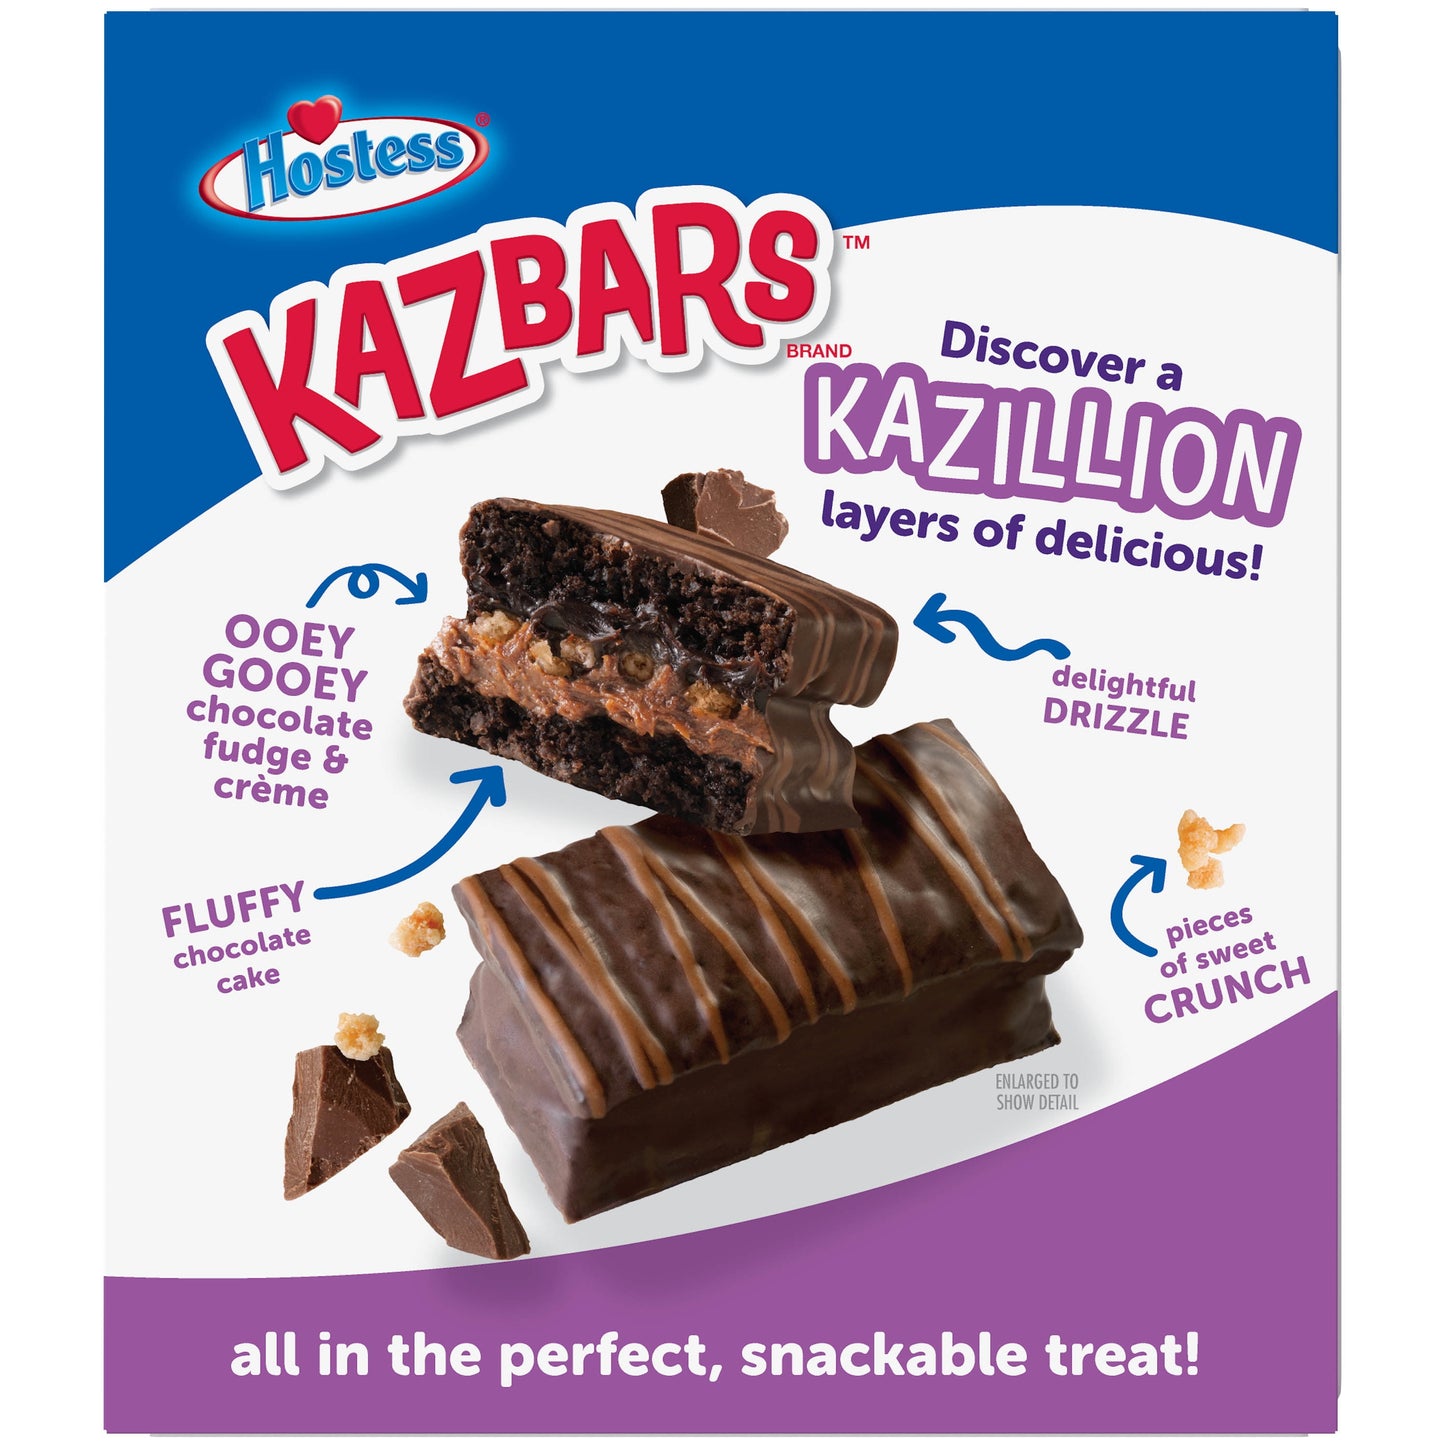 HOSTESS Triple Chocolate KAZBARS Creamy and Crunchy Layer Bar, Individually Wrapped - 10 oz, 8 Count